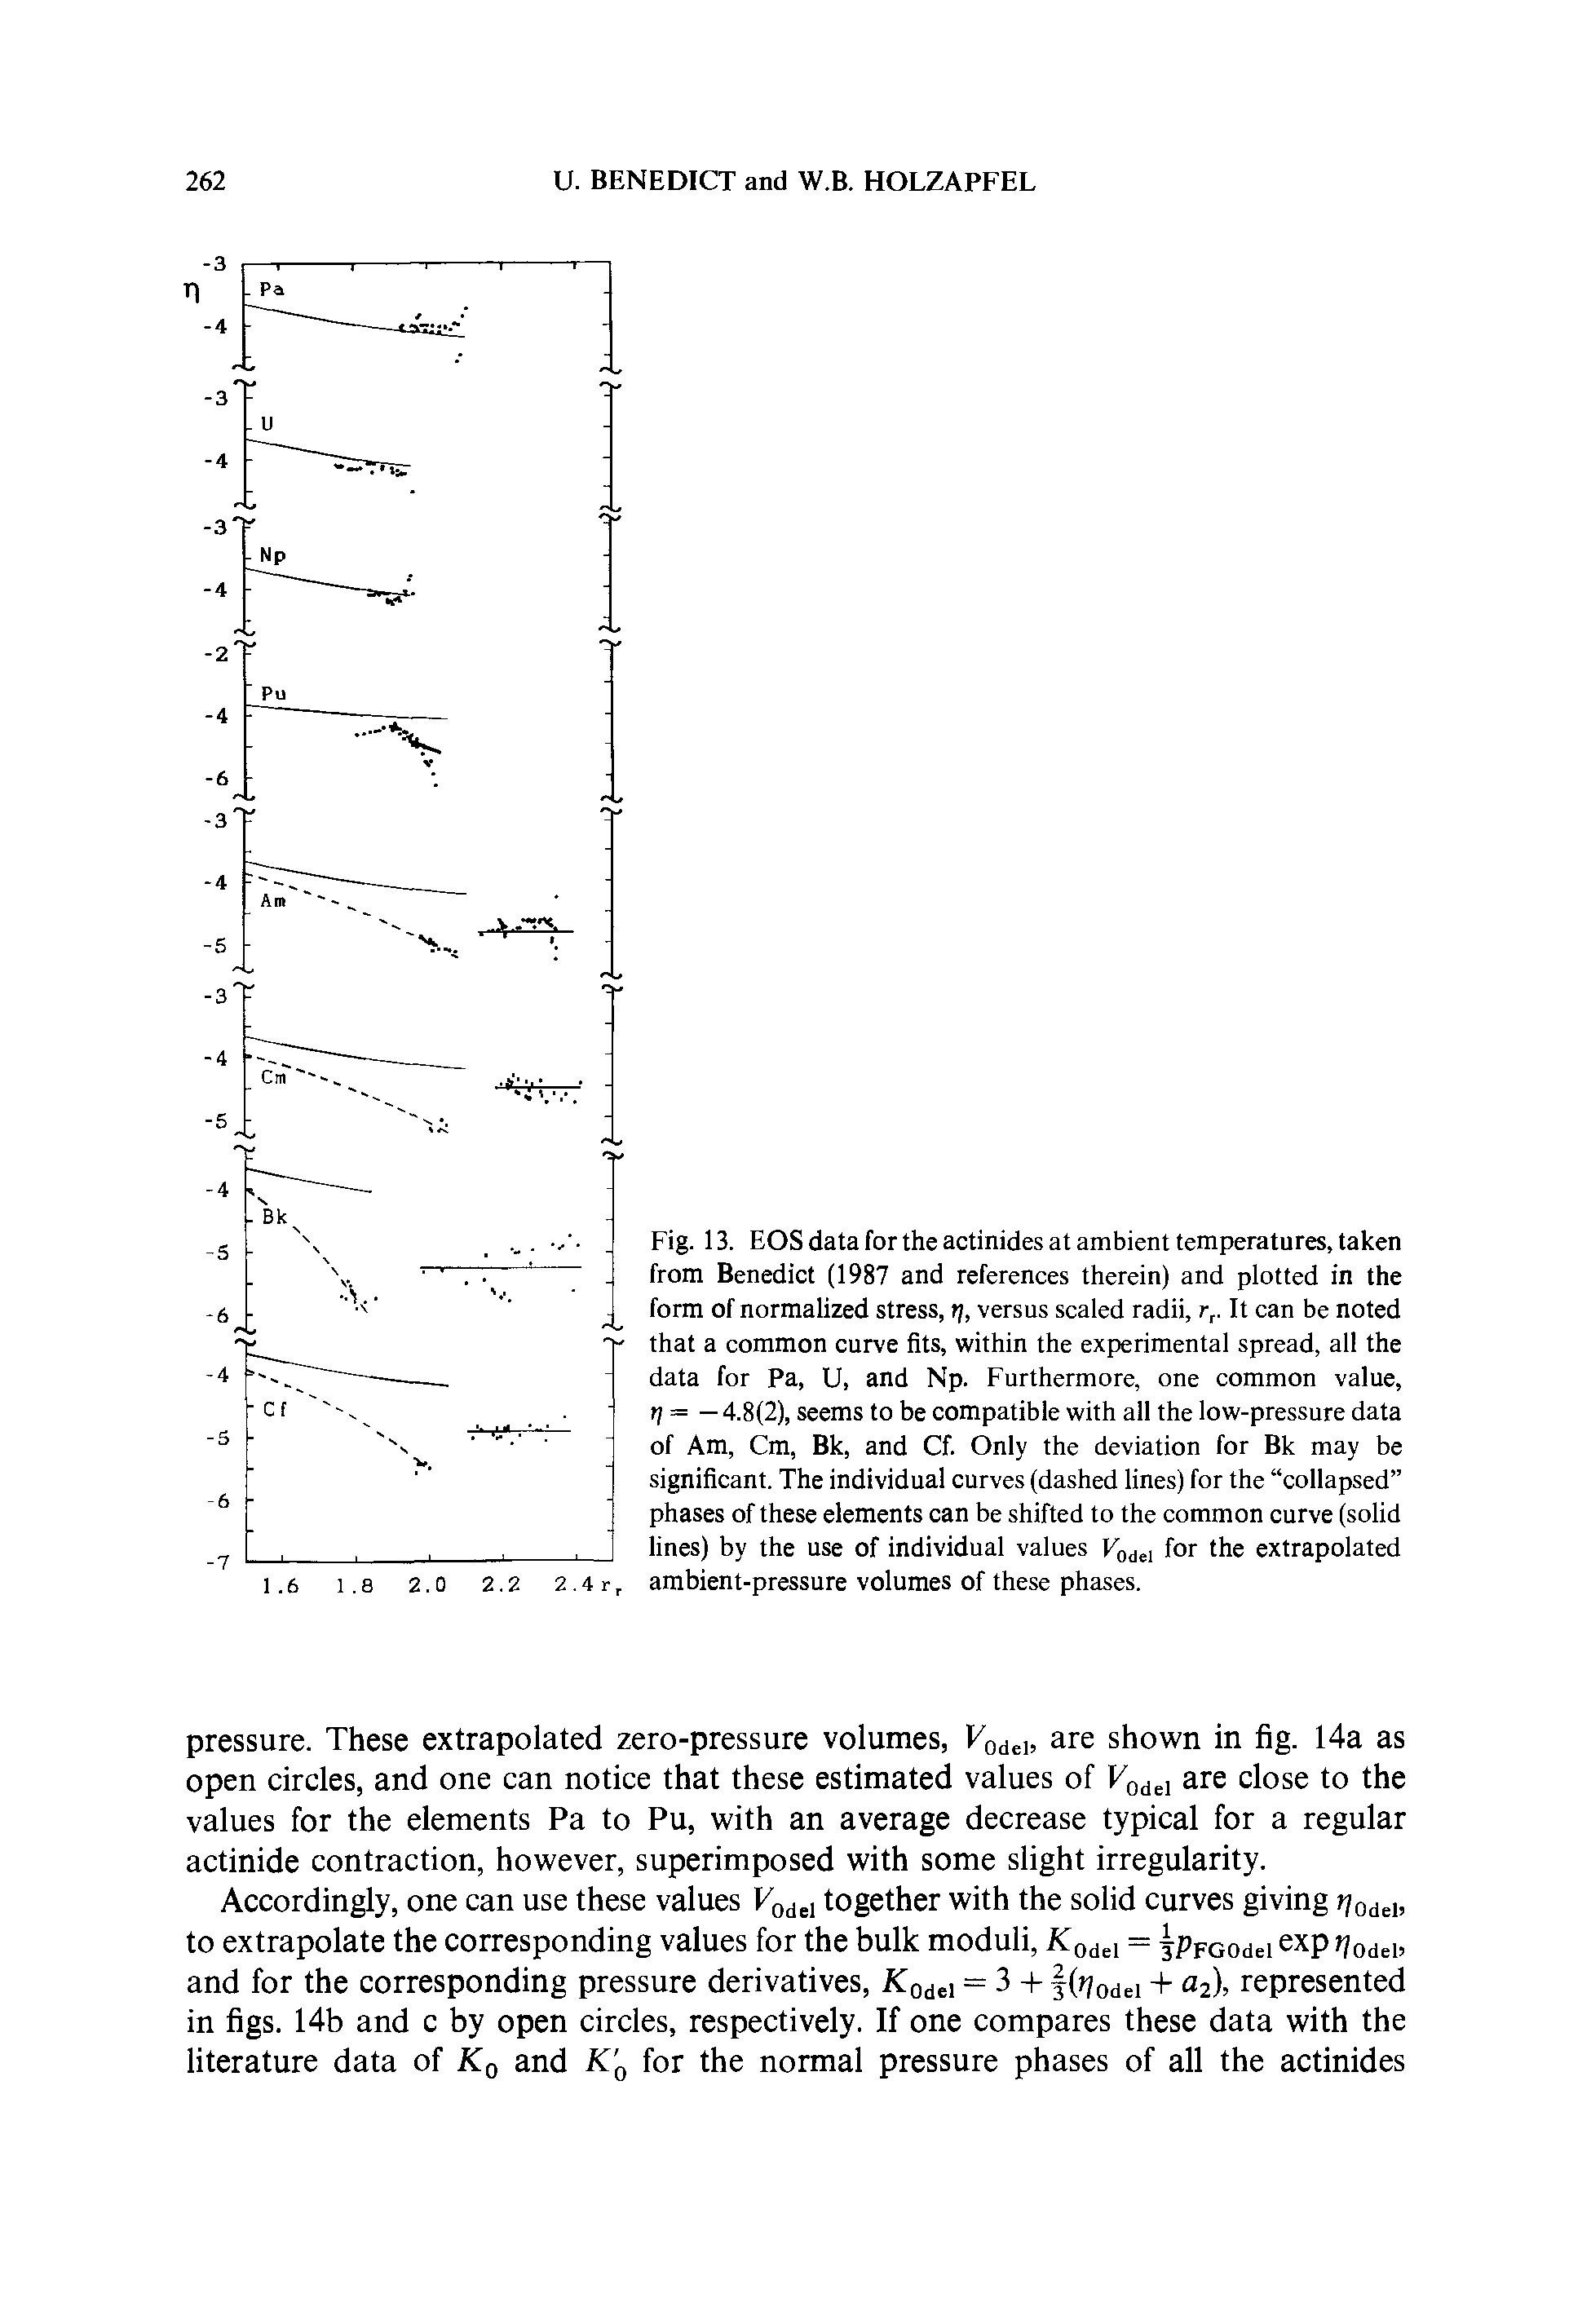 Fig. 13. EOS data for the actinides at ambient temperatures, taken from Benedict (1987 and references therein) and plotted in the form of normaUzed stress, tj, versus scaled radii, r,. It can be noted that a common curve fits, within the experimental spread, all the data for Pa, U, and Np. Furthermore, one common value, tj = —4.8(2), seems to be compatible with all the low-pressure data of Am, Cm, Bk, and Cf. Only the deviation for Bk may be significant. The individual curves (dashed lines) for the collapsed phases of these elements can be shifted to the common curve (solid lines) by the use of individual values for the extrapolated ambient-pressure volumes of these phases.